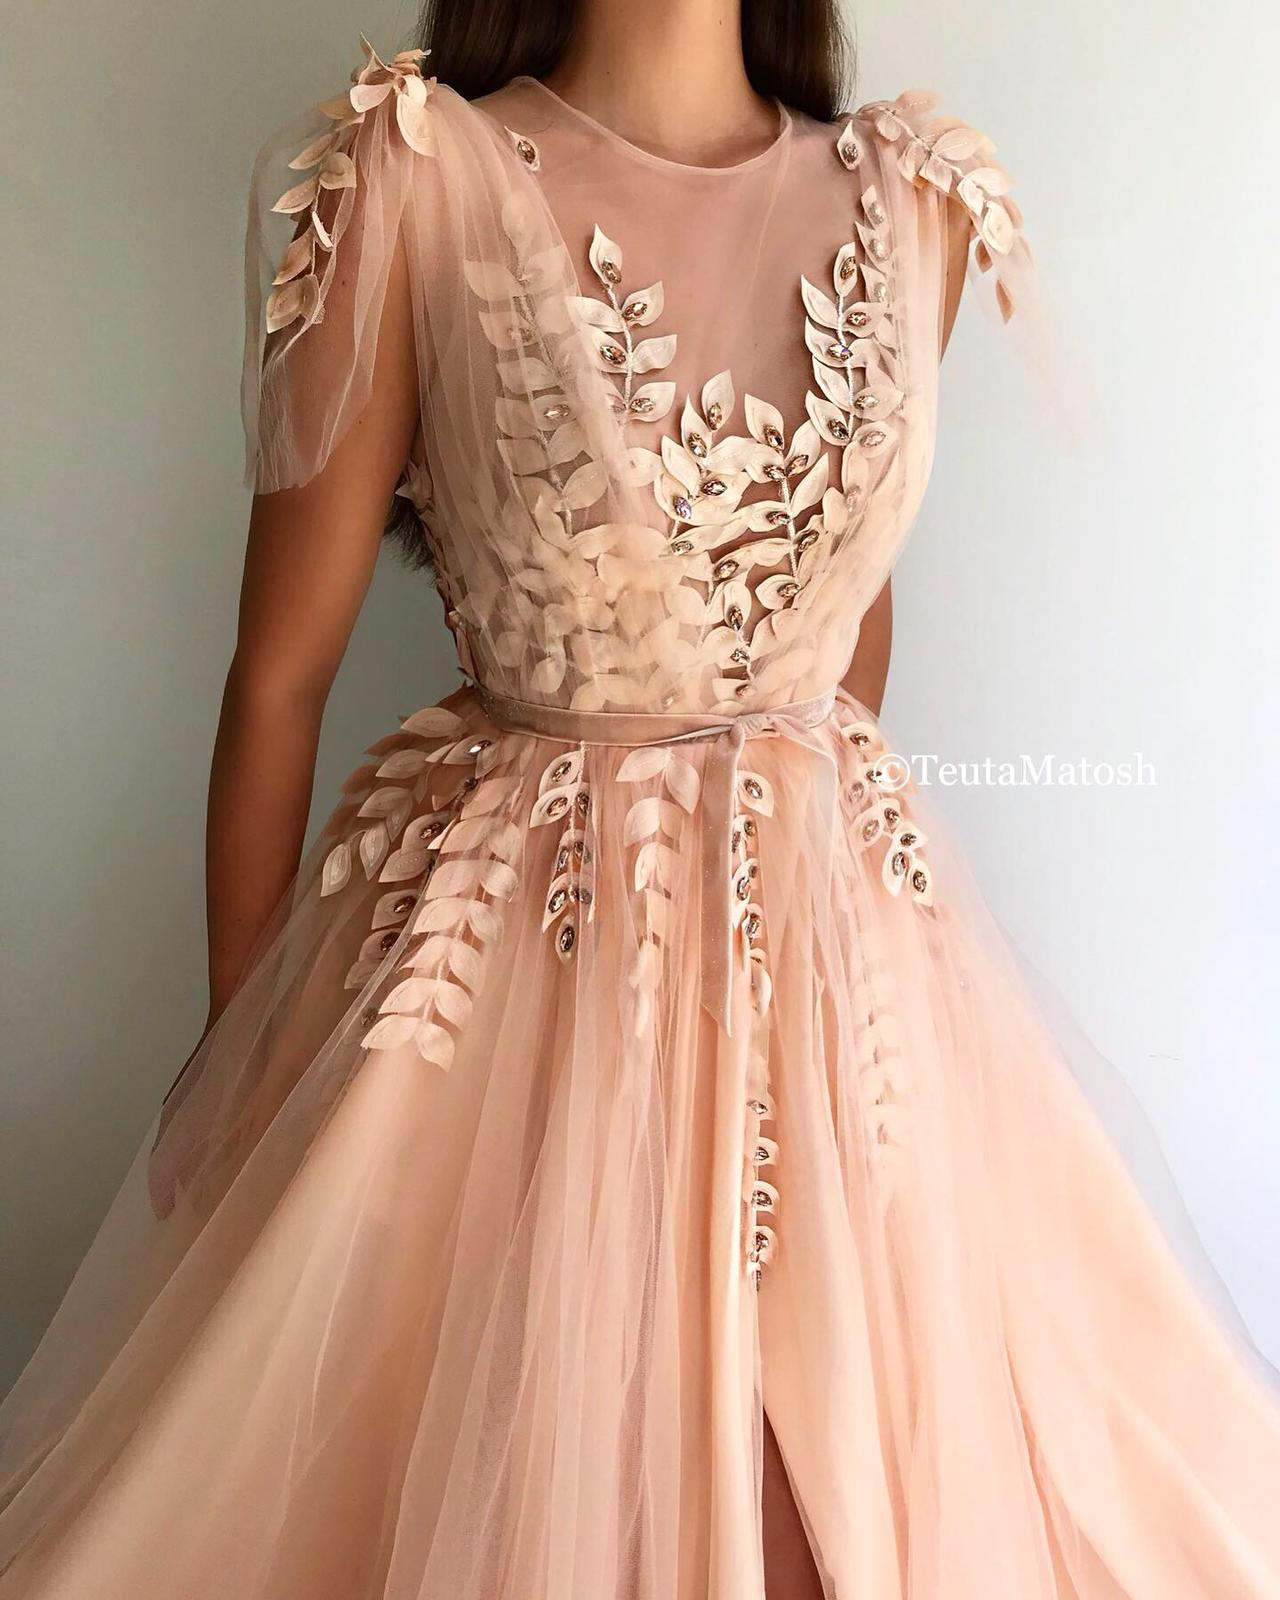 Peach A-Line dress with no sleeves and embroidery